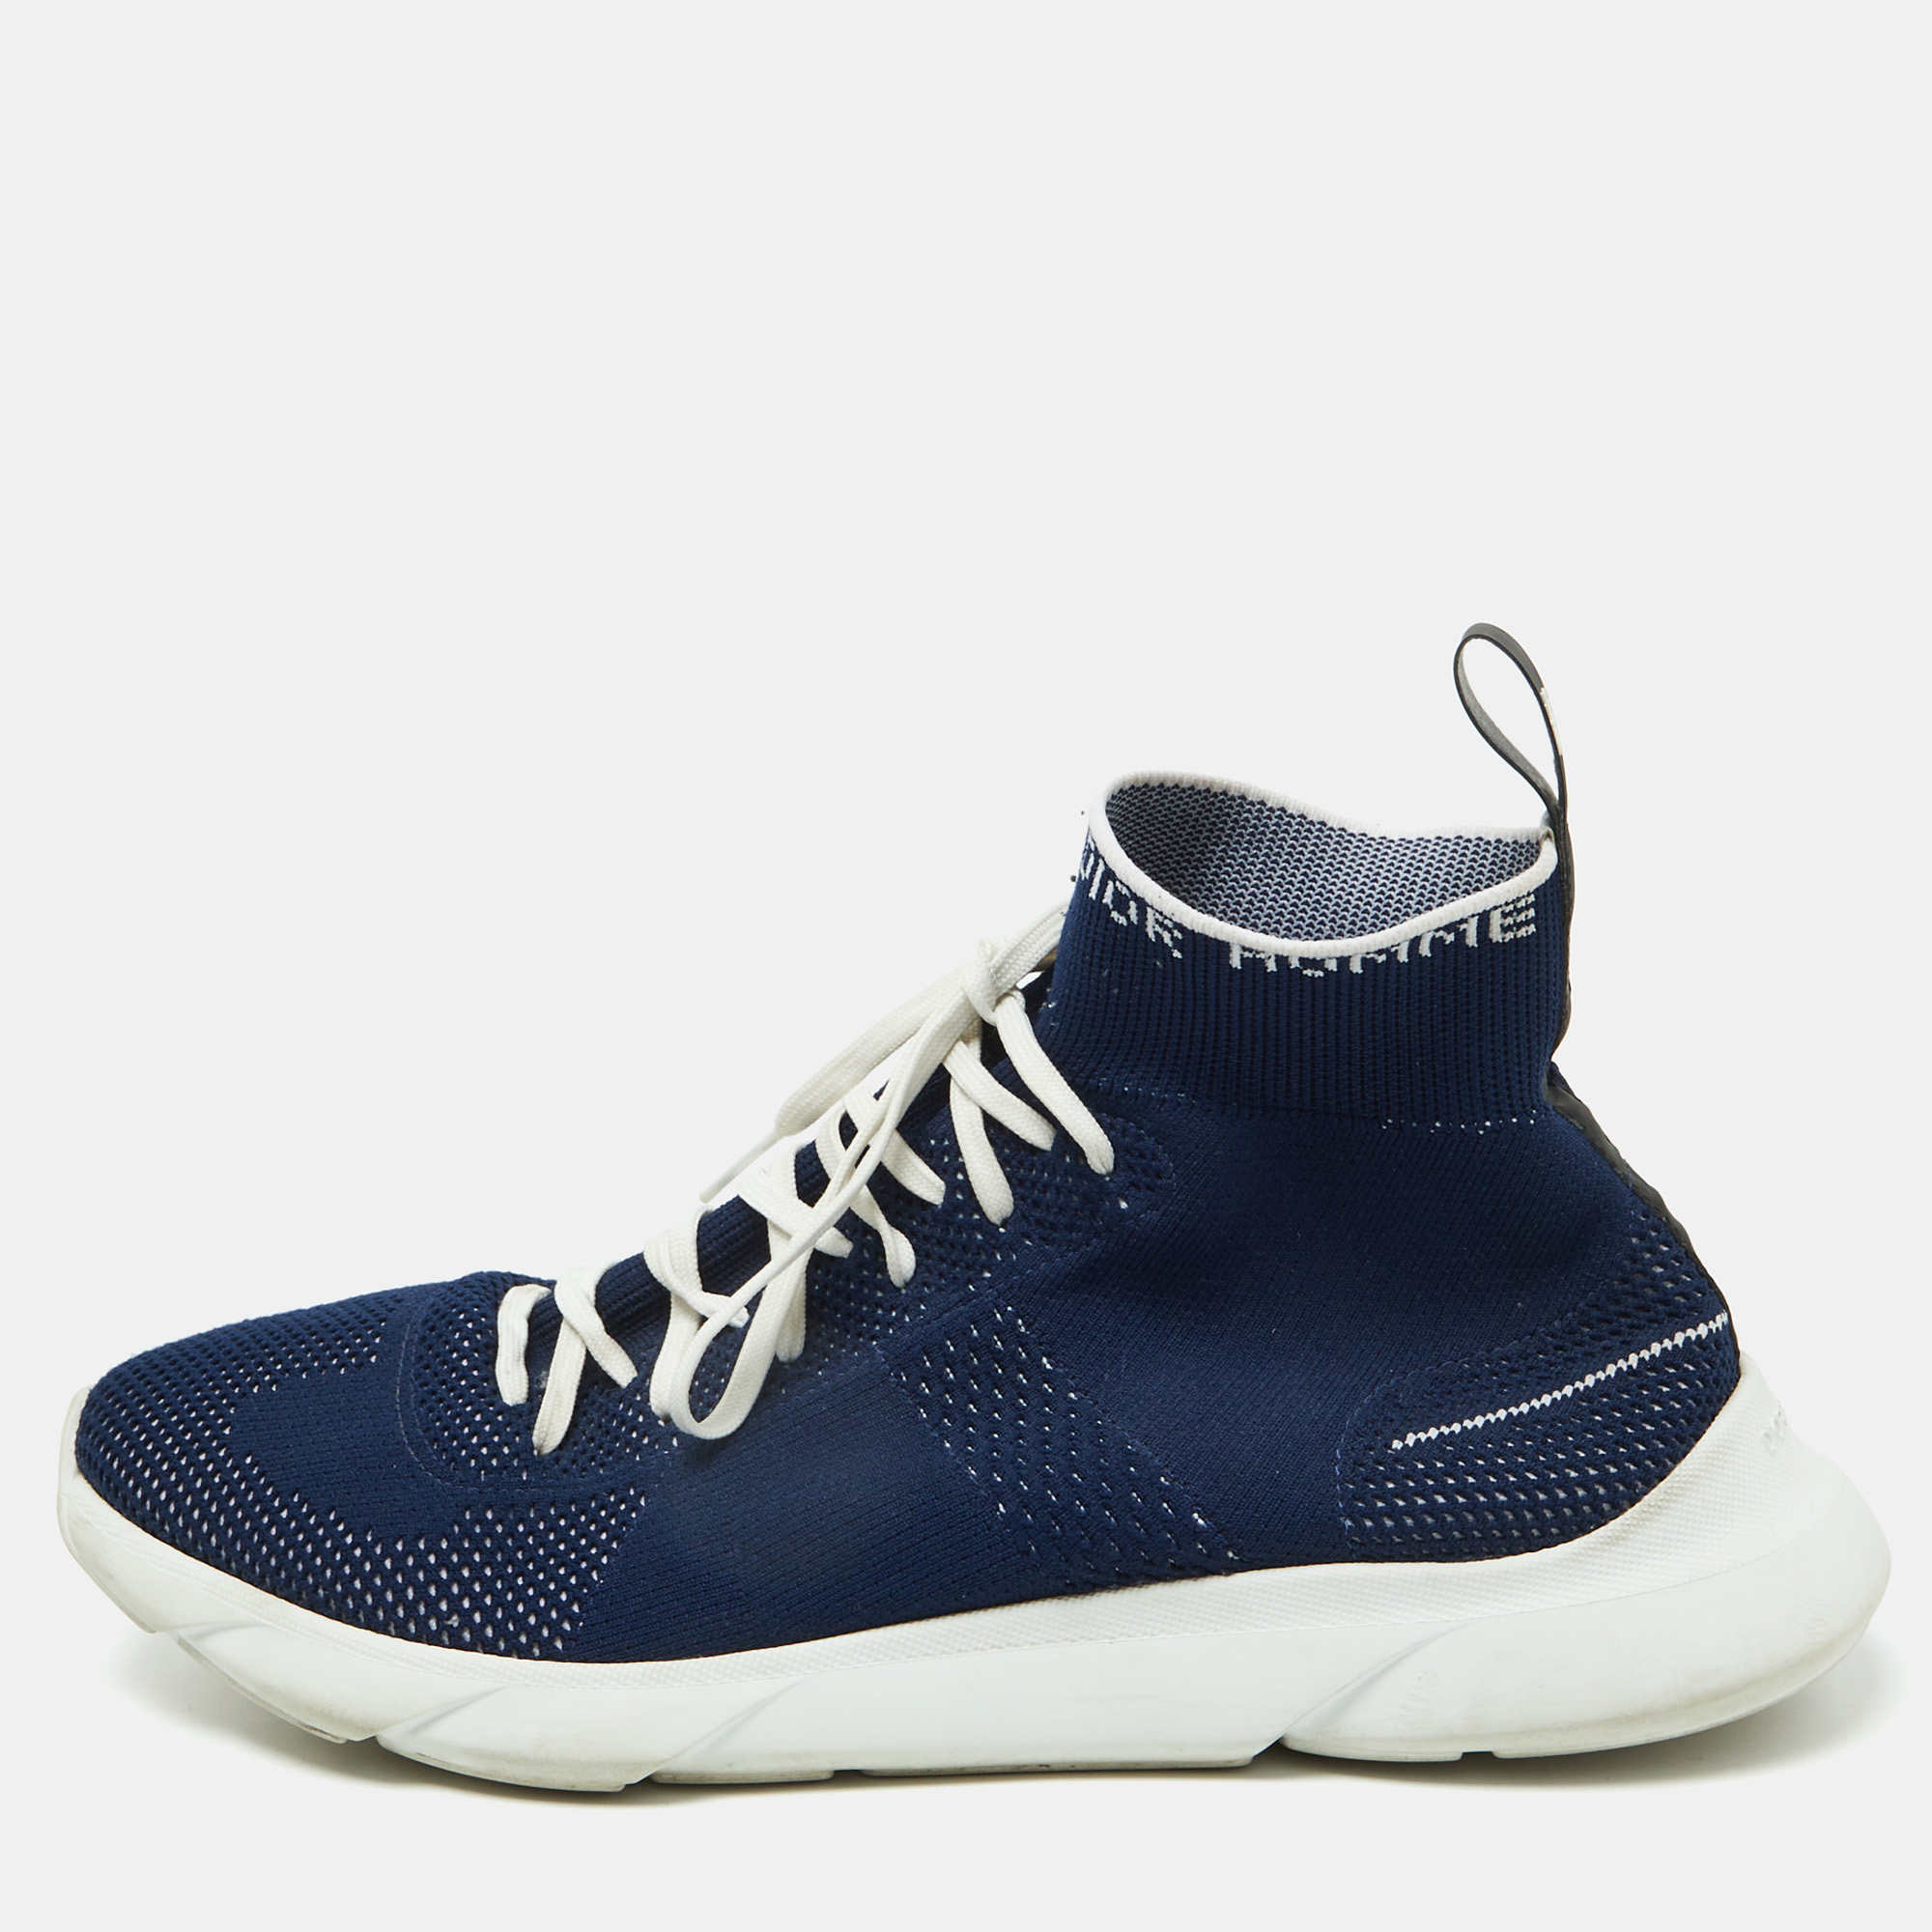 

Dior Homme Blue Knit Fabric B21 Sock Sneakers Size